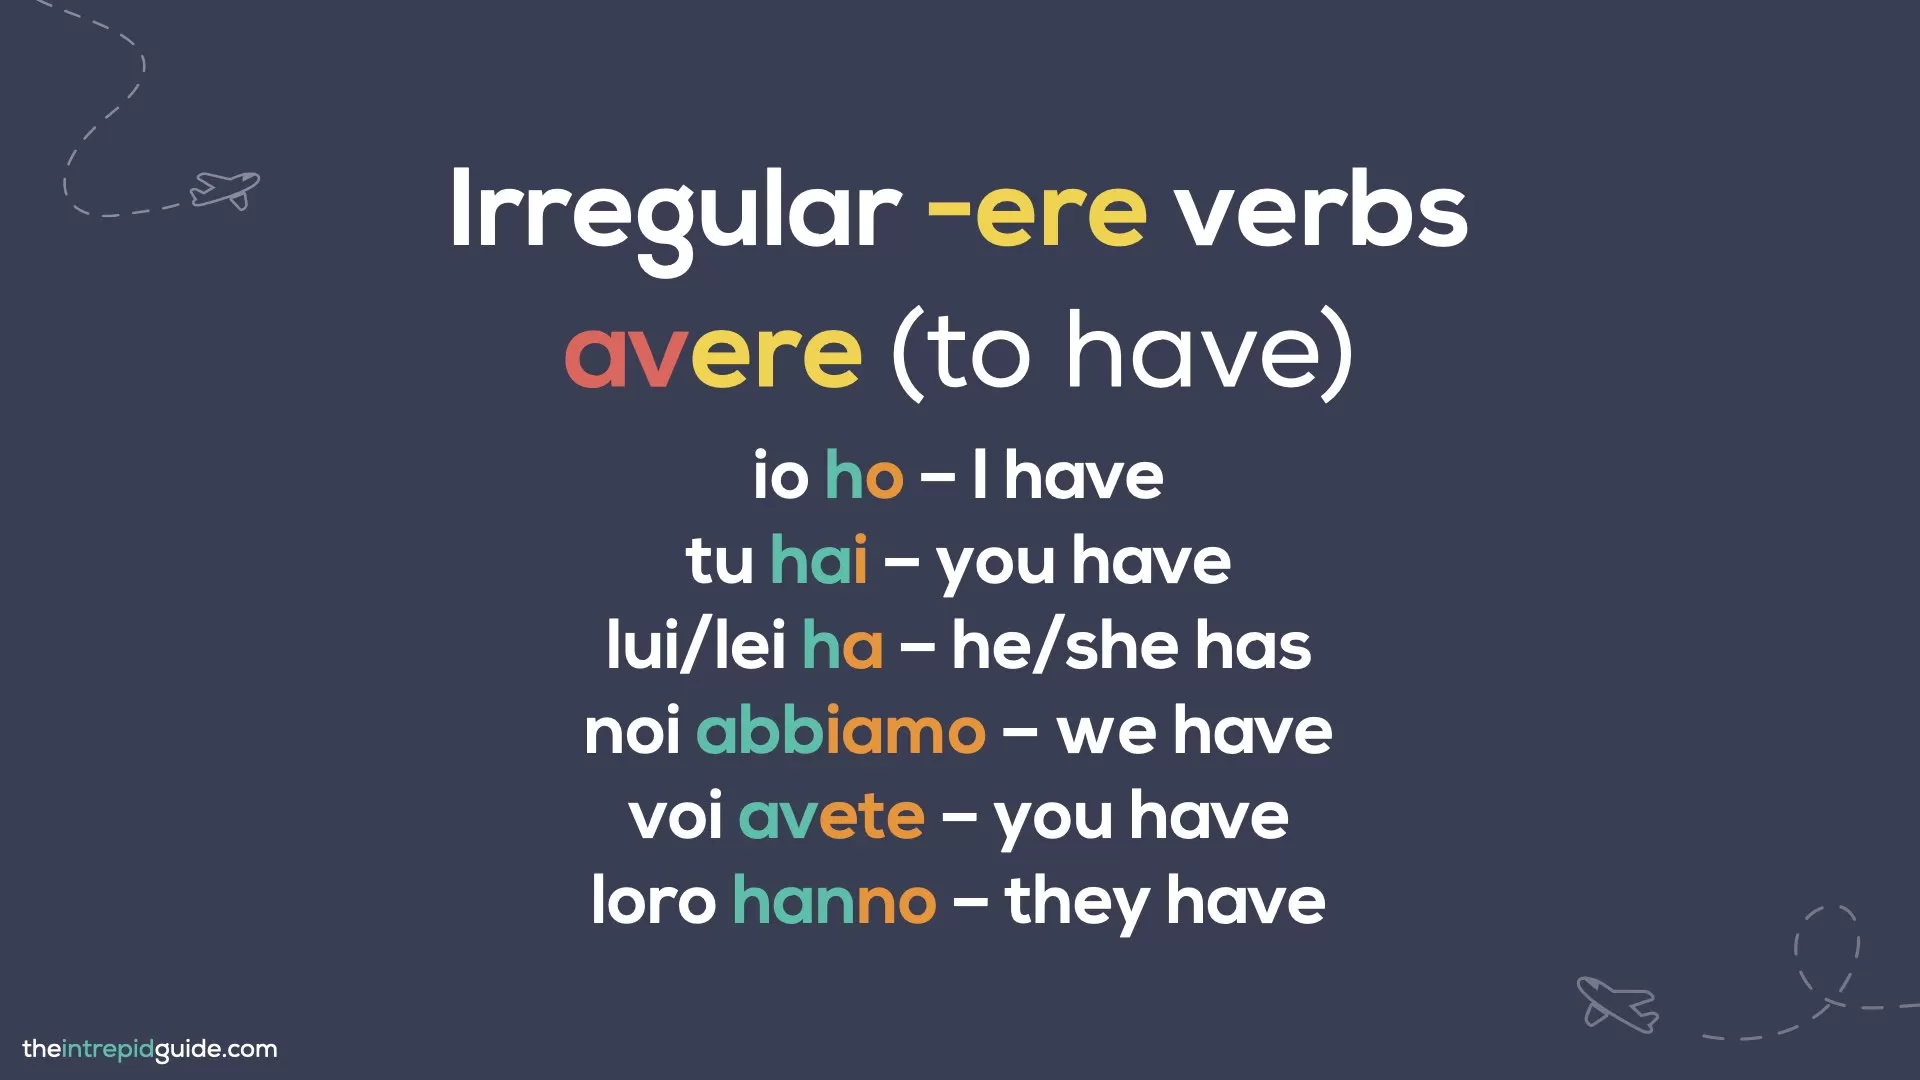 How to Conjugate Italian Verbs - Conjugating the verb avere - to have